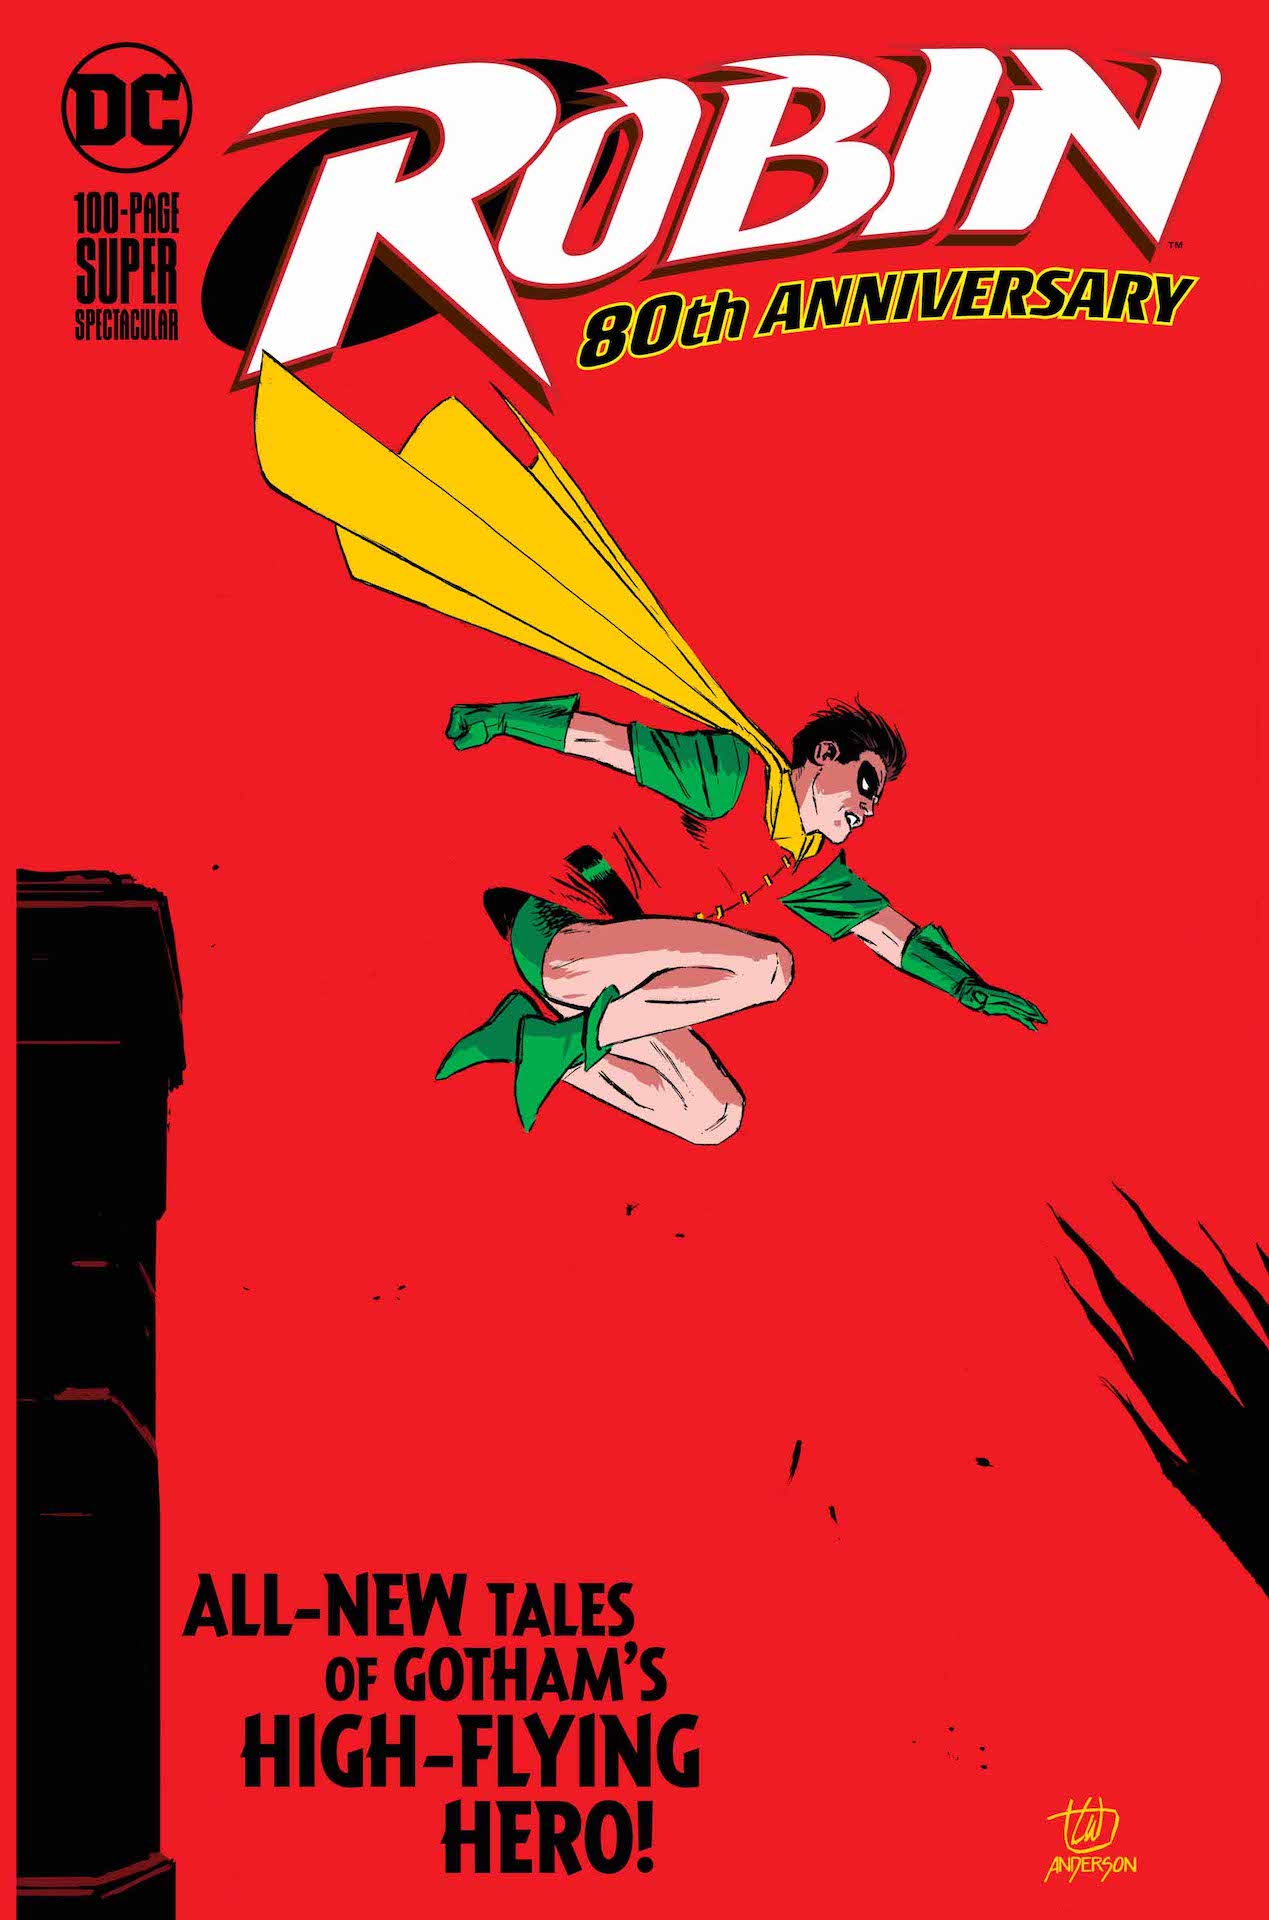 DC Preview: Robin 80th Anniversary 100-Page Super Spectacular #1